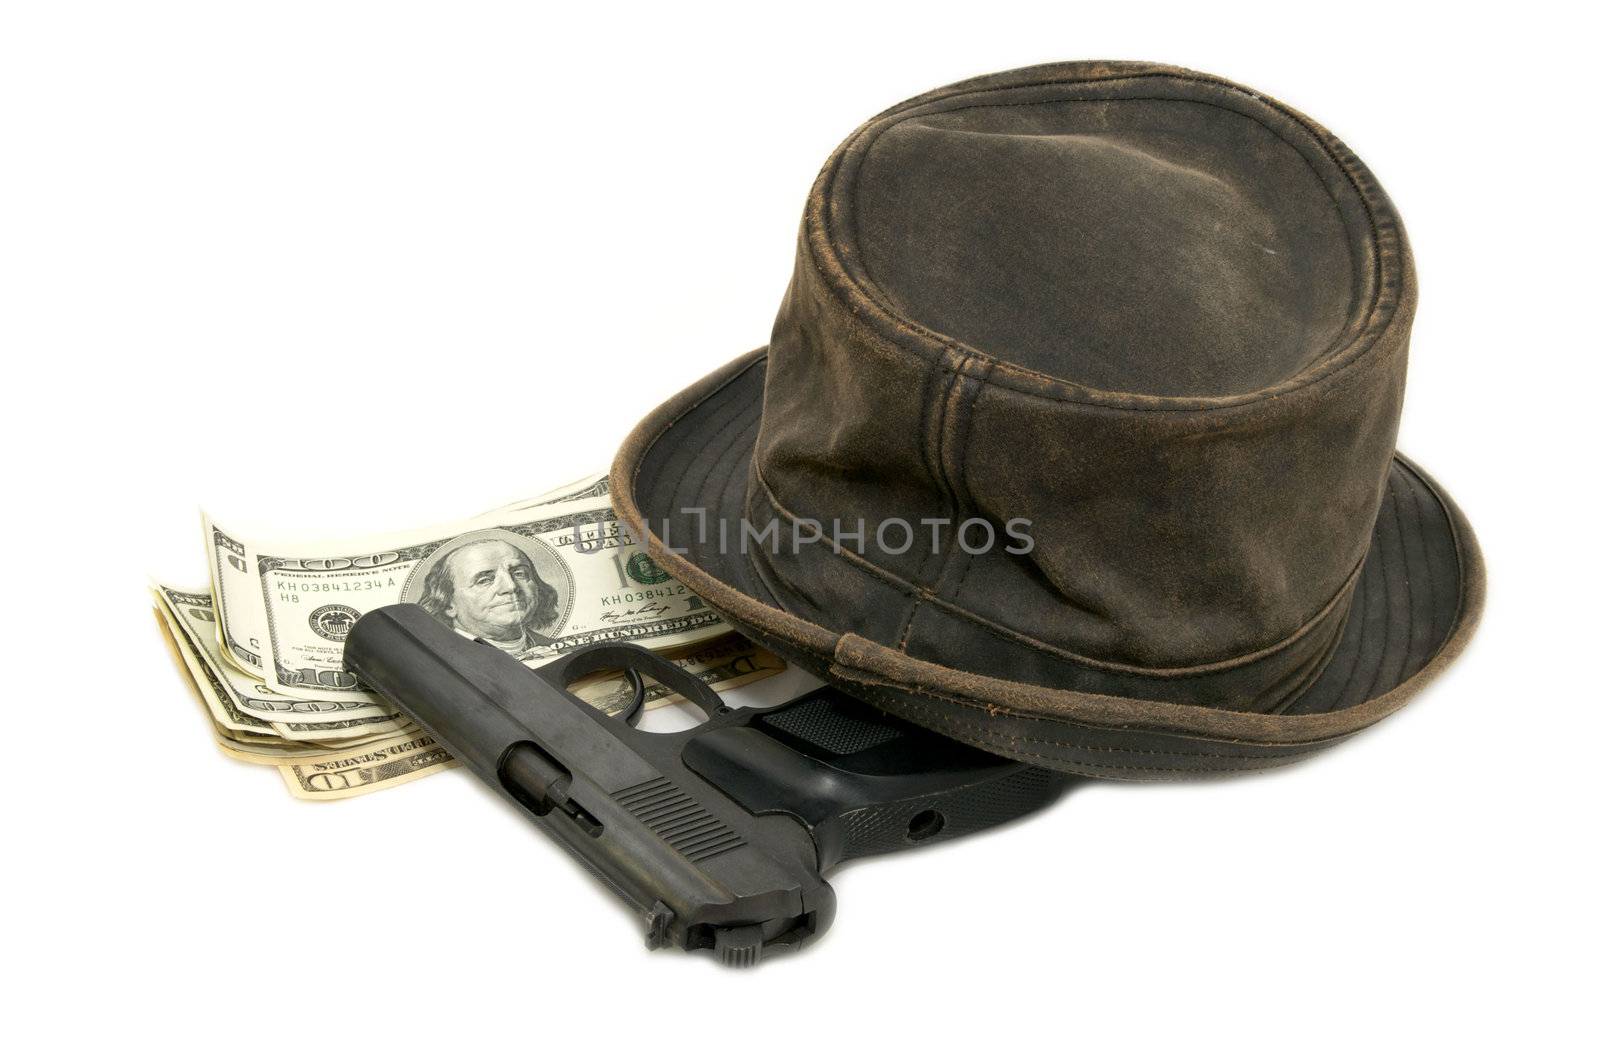 dollars and a gun and a hat on a white background